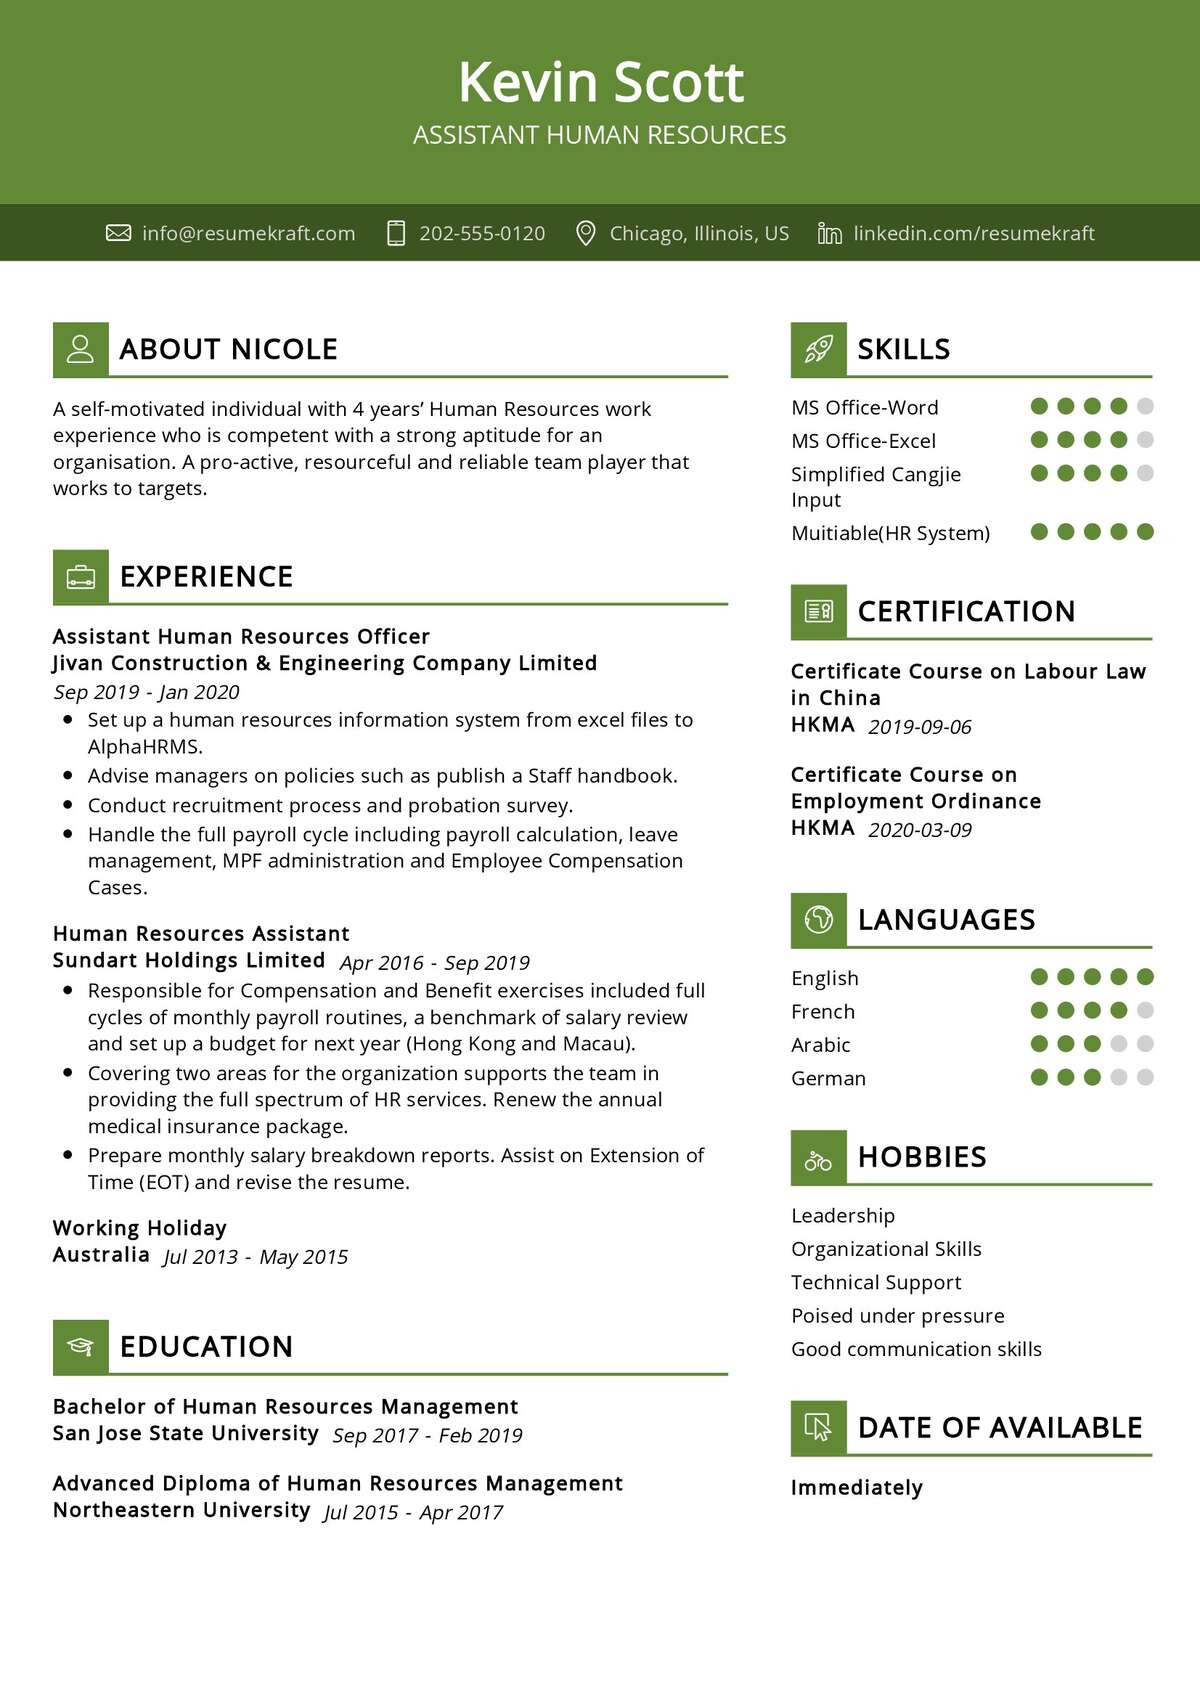 Free Sample Resume for Human Resources assistant assistant Human Resources Resume Sample 2021 Writing Guide …